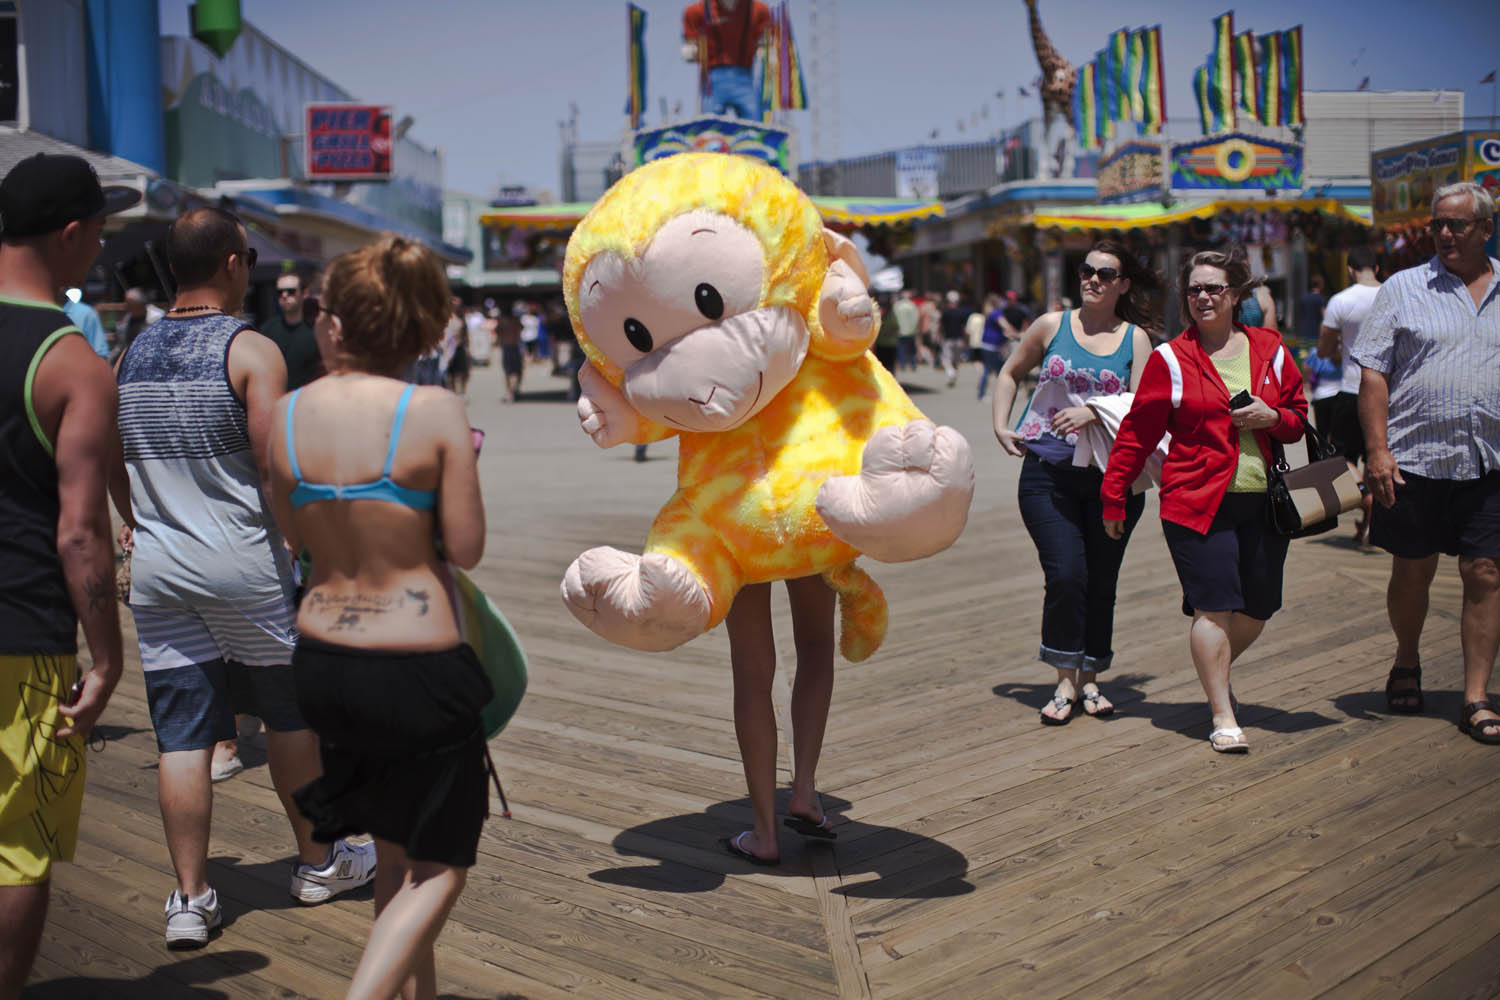 May 27, 2013. Nicole Zupp carries a stuffed monkey prize on the boardwalk at Seaside Heights on the first weekend of New Jersey beaches re-opening to the public.